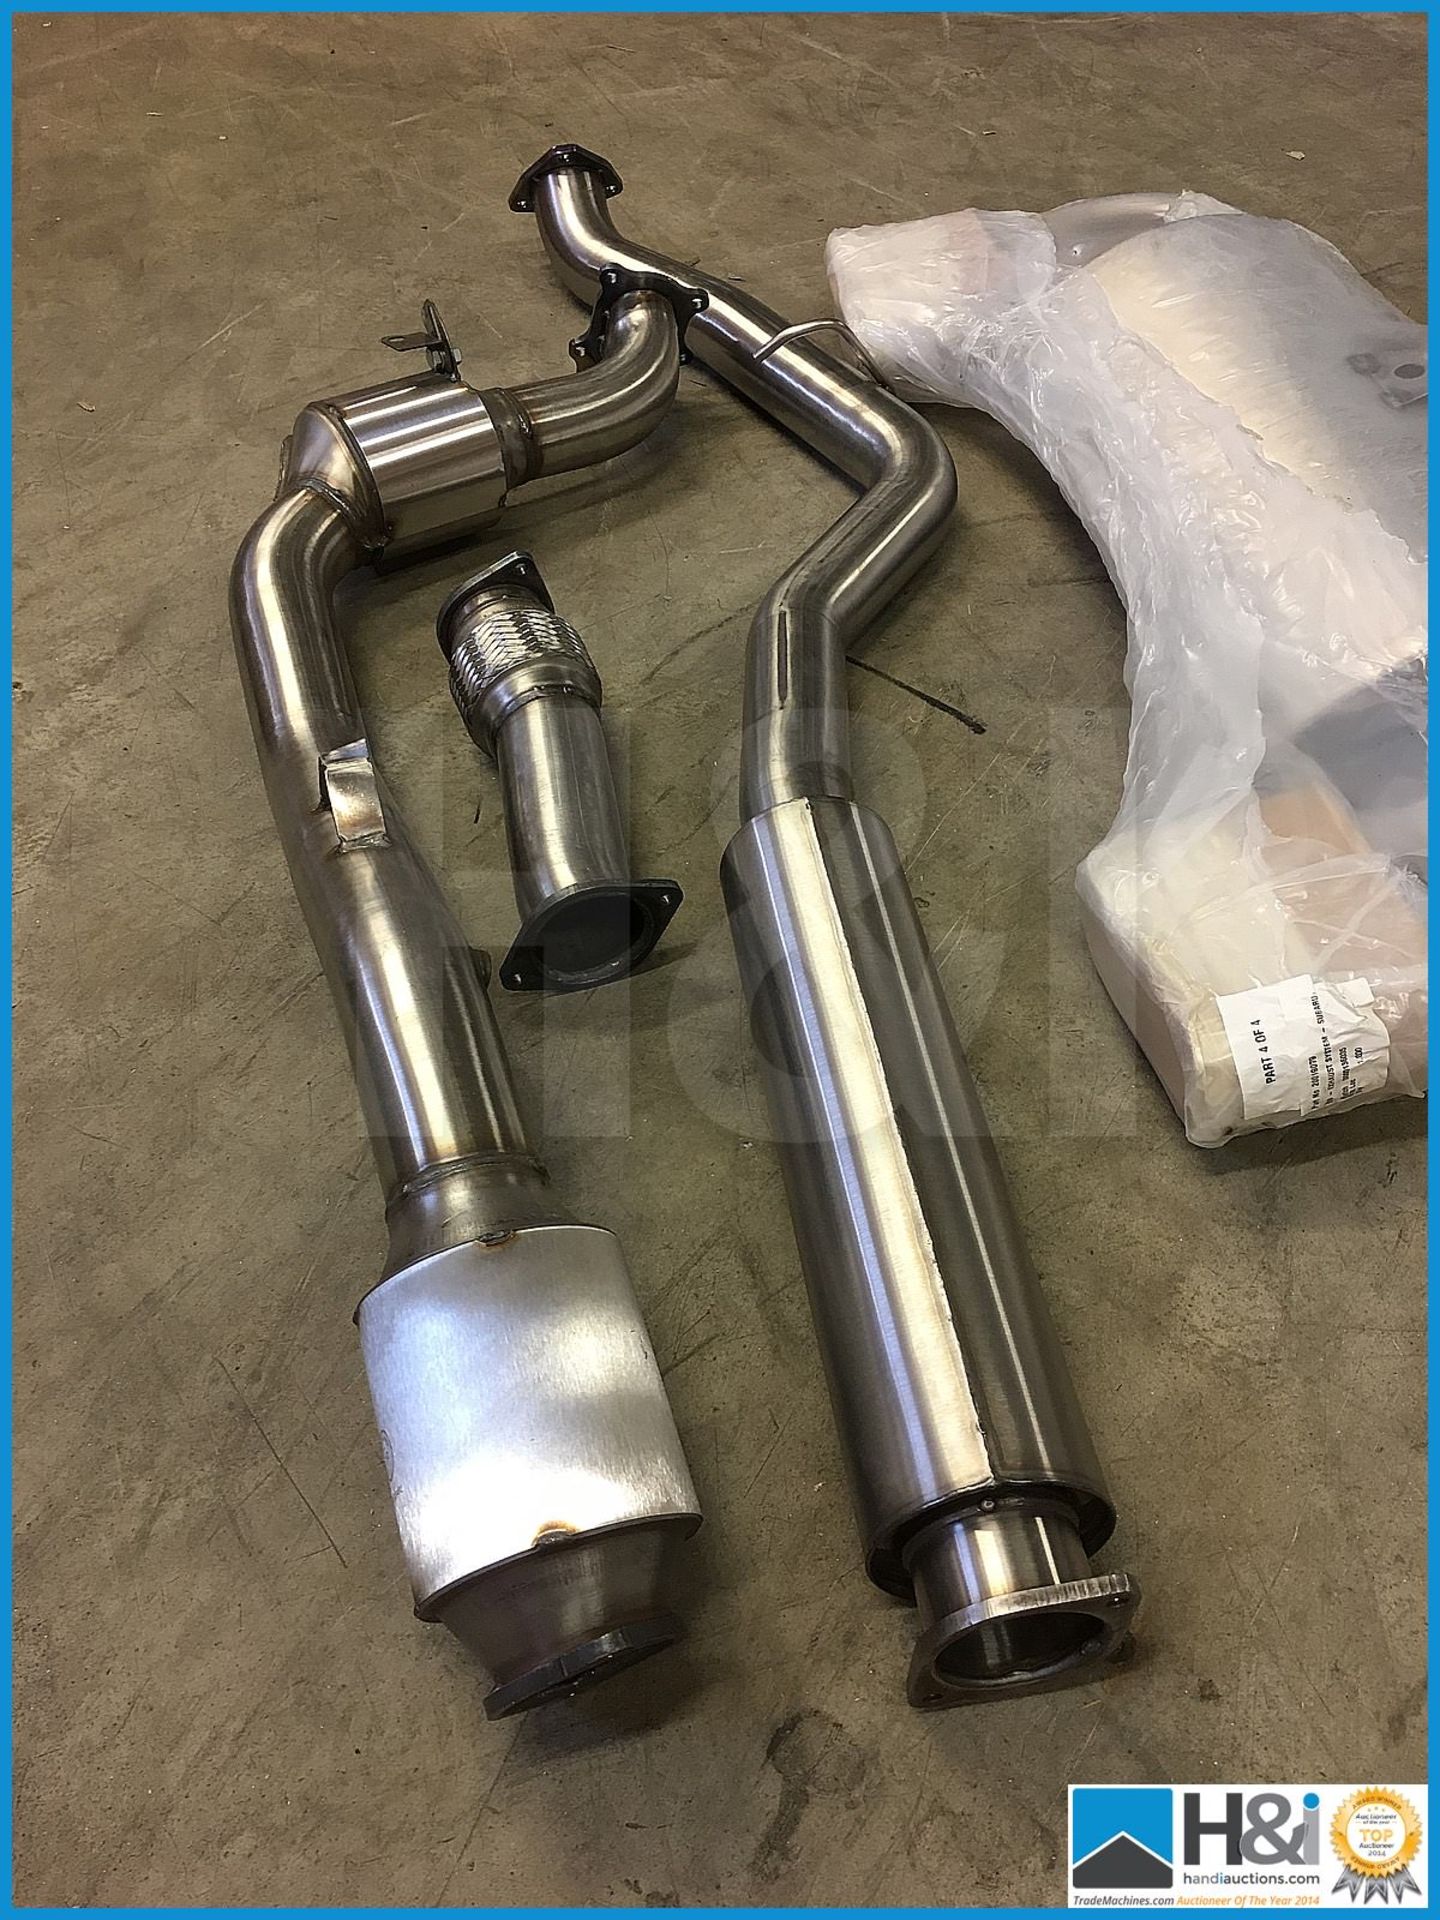 Subaru CS400 exhaust system. Last ones available in the world -- MC:N/A CILN:N/A - Image 2 of 6